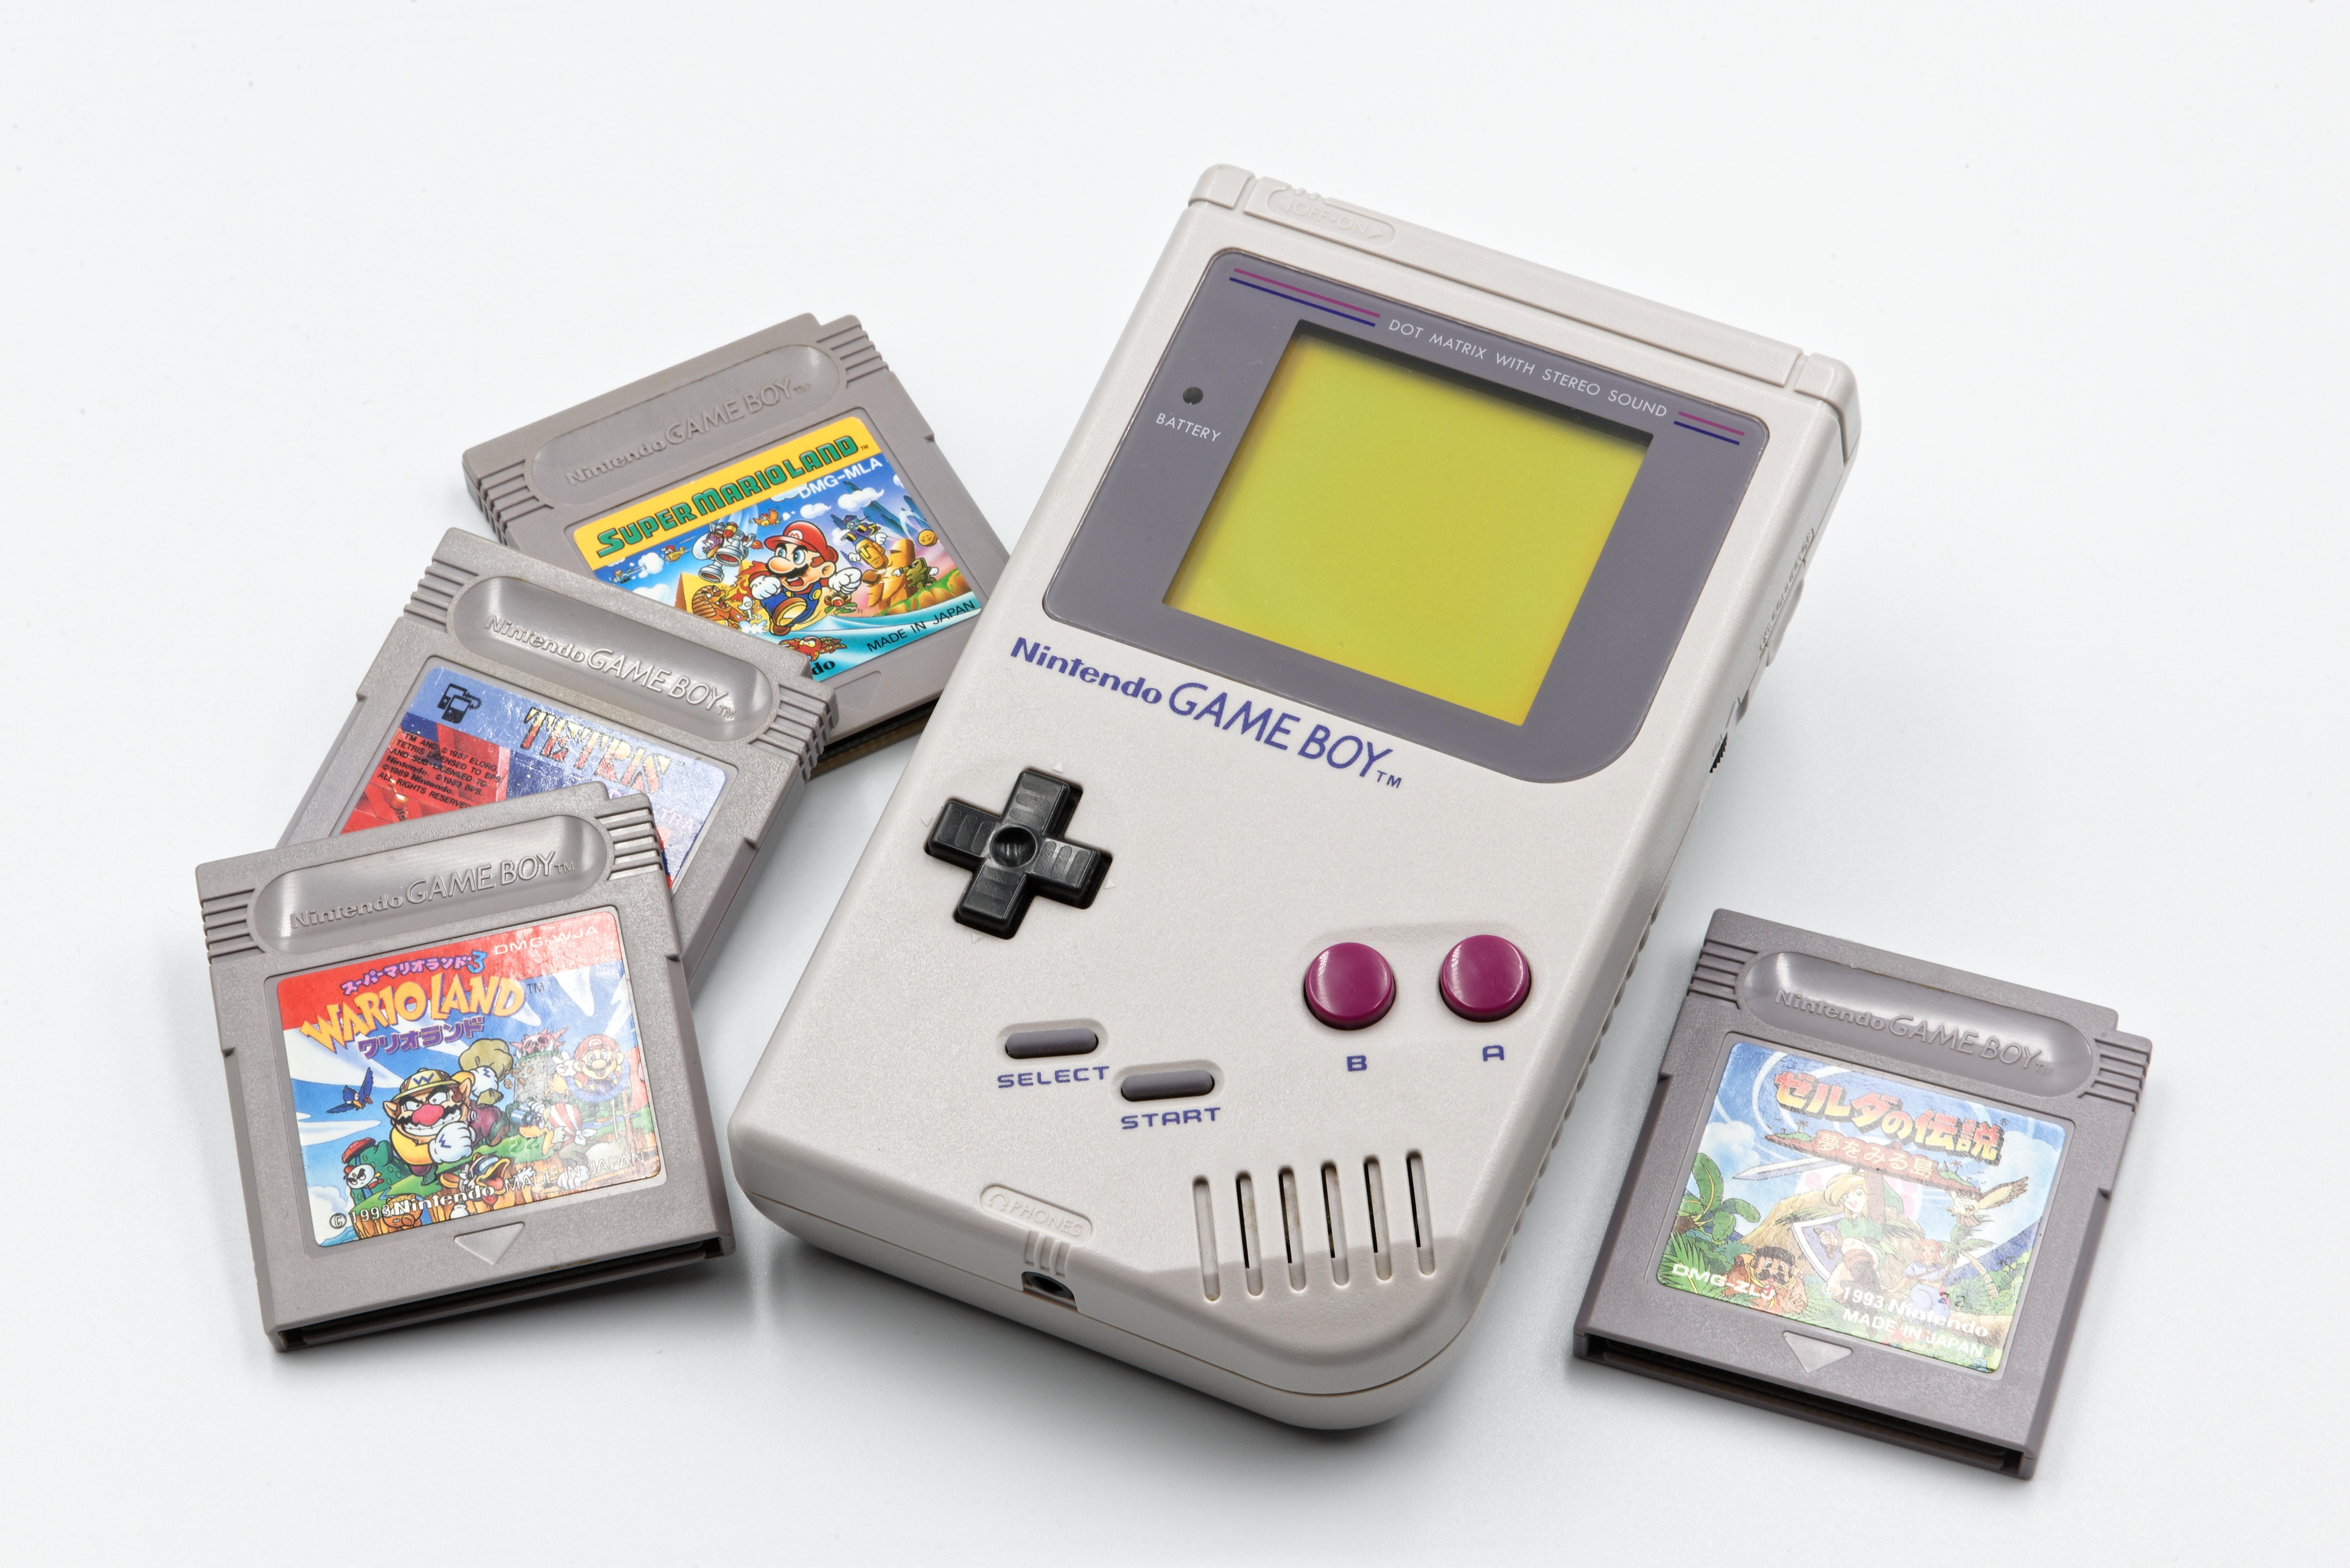 Play Game Boy Classics on Your iPhone While You Still Can